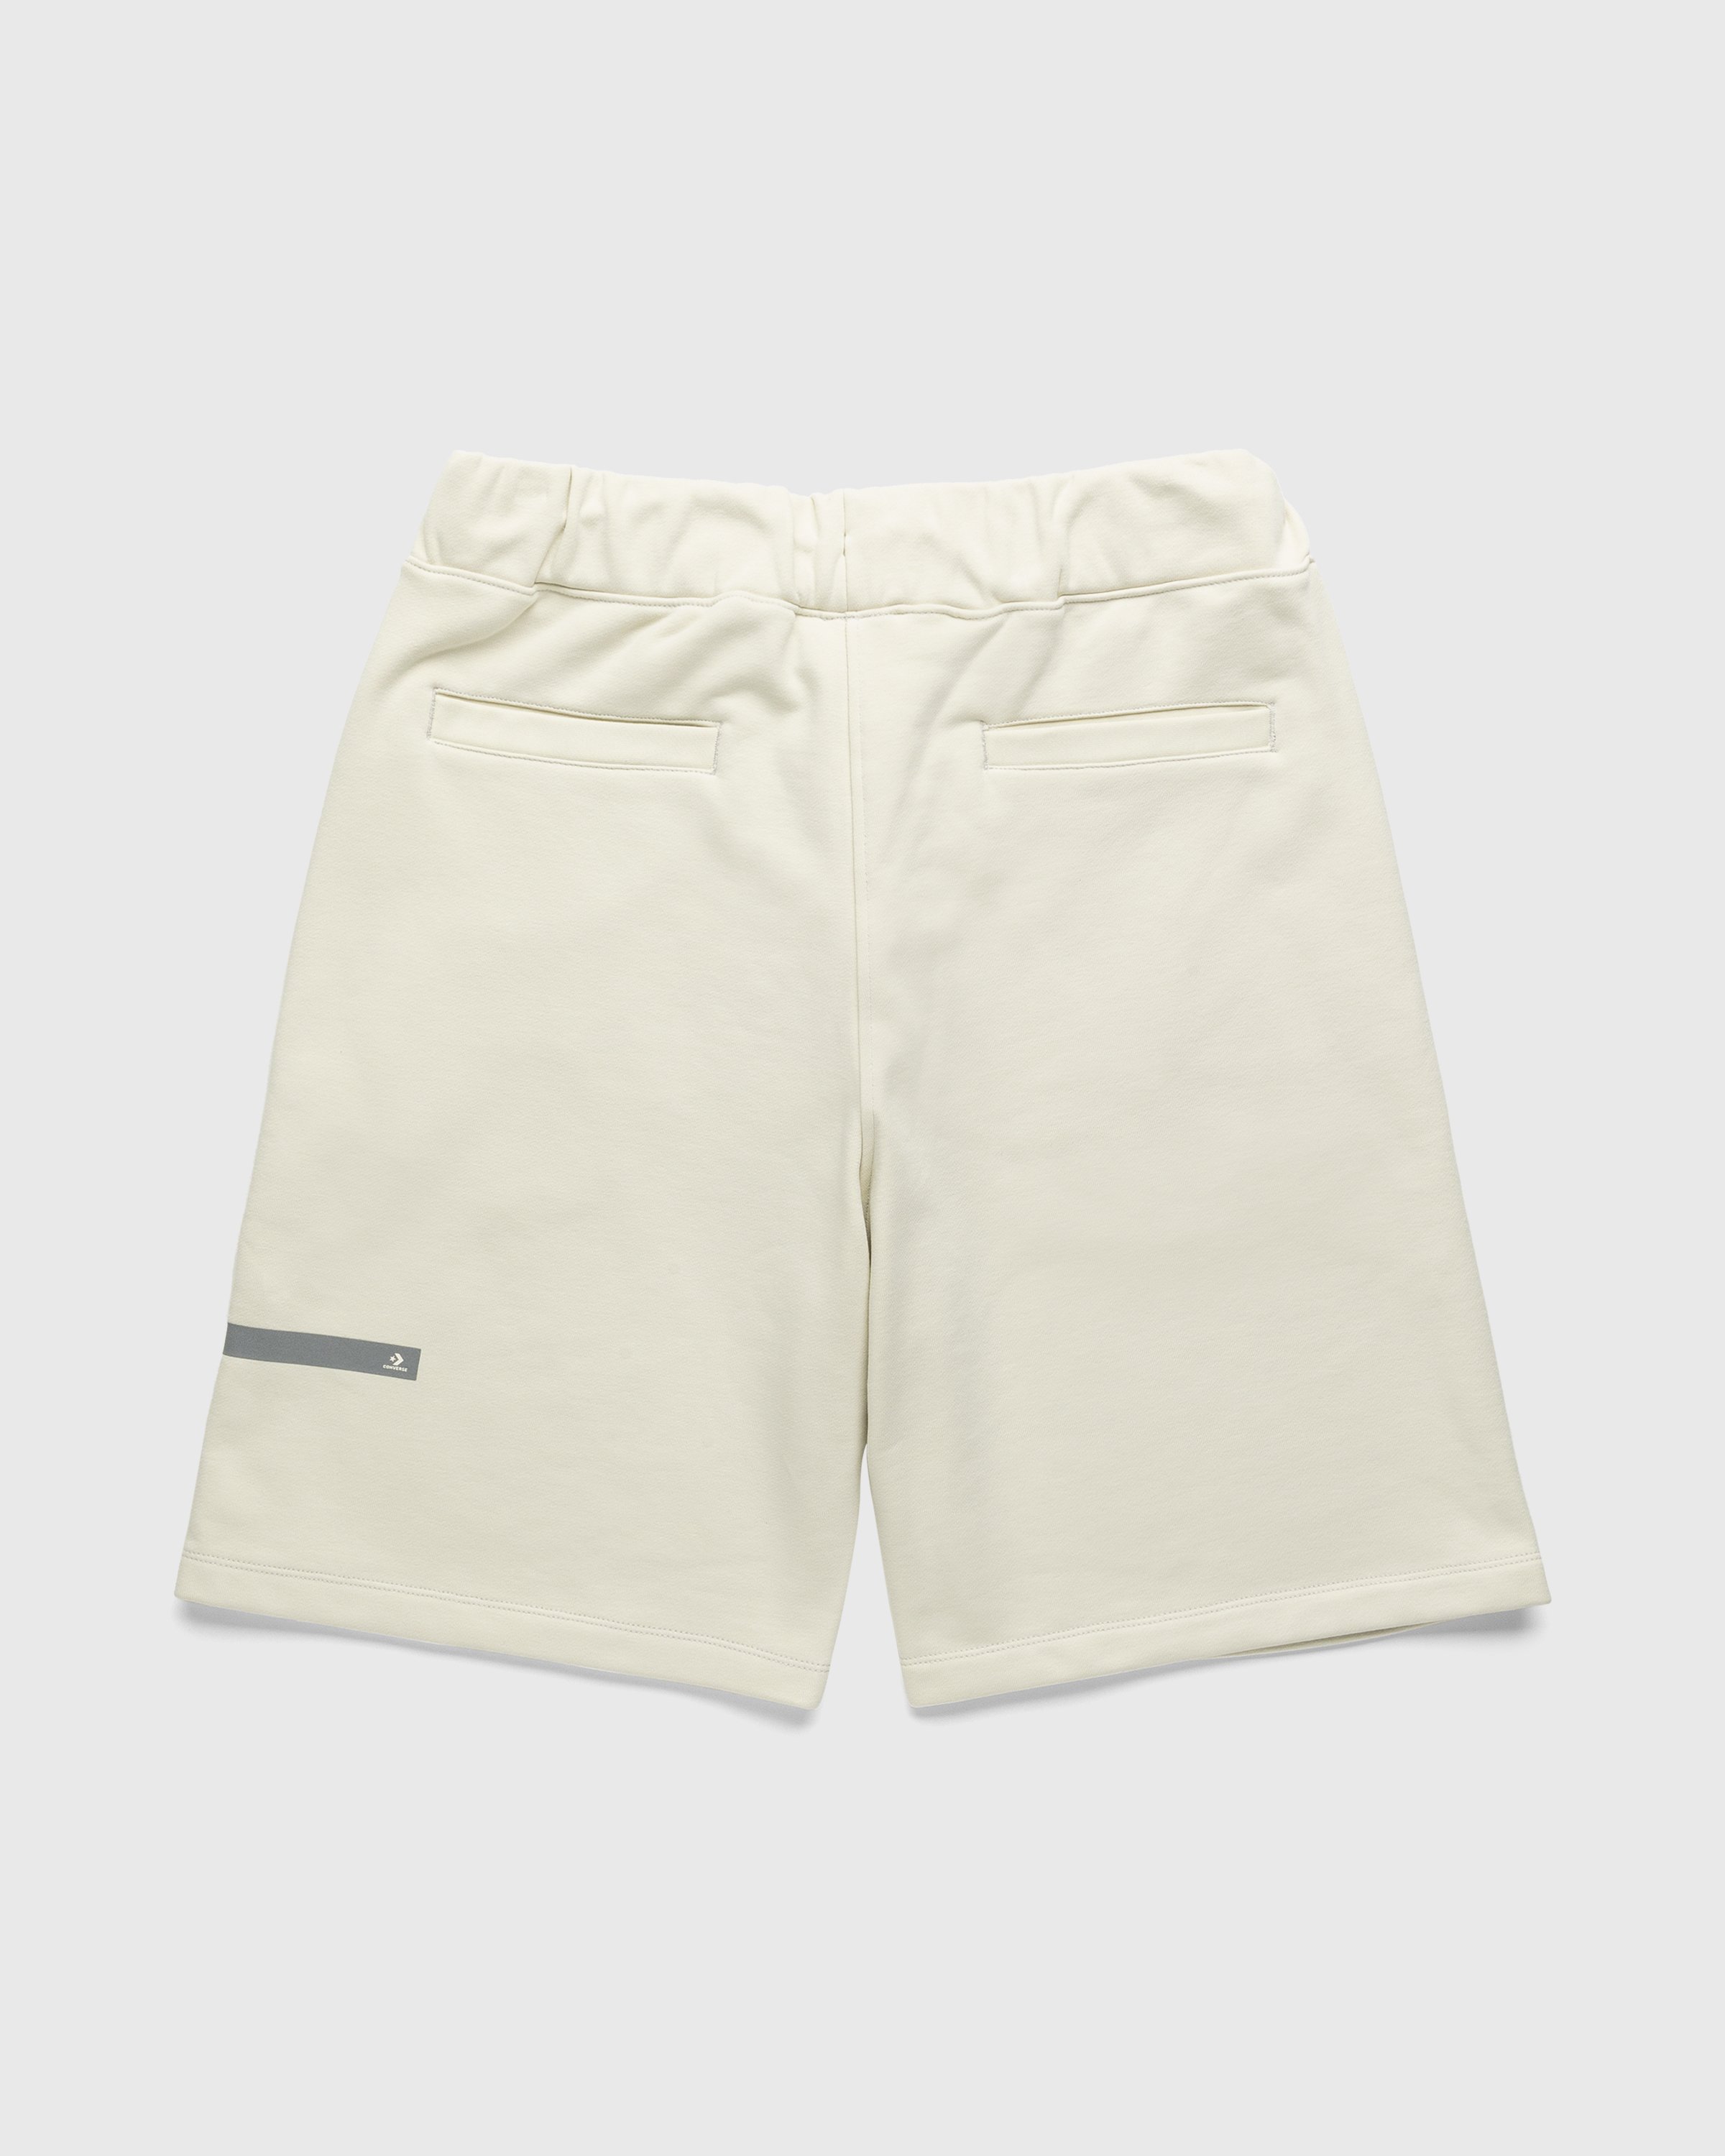 Converse x A-Cold-Wall* - Reflective Short Bone White - Clothing - White - Image 2